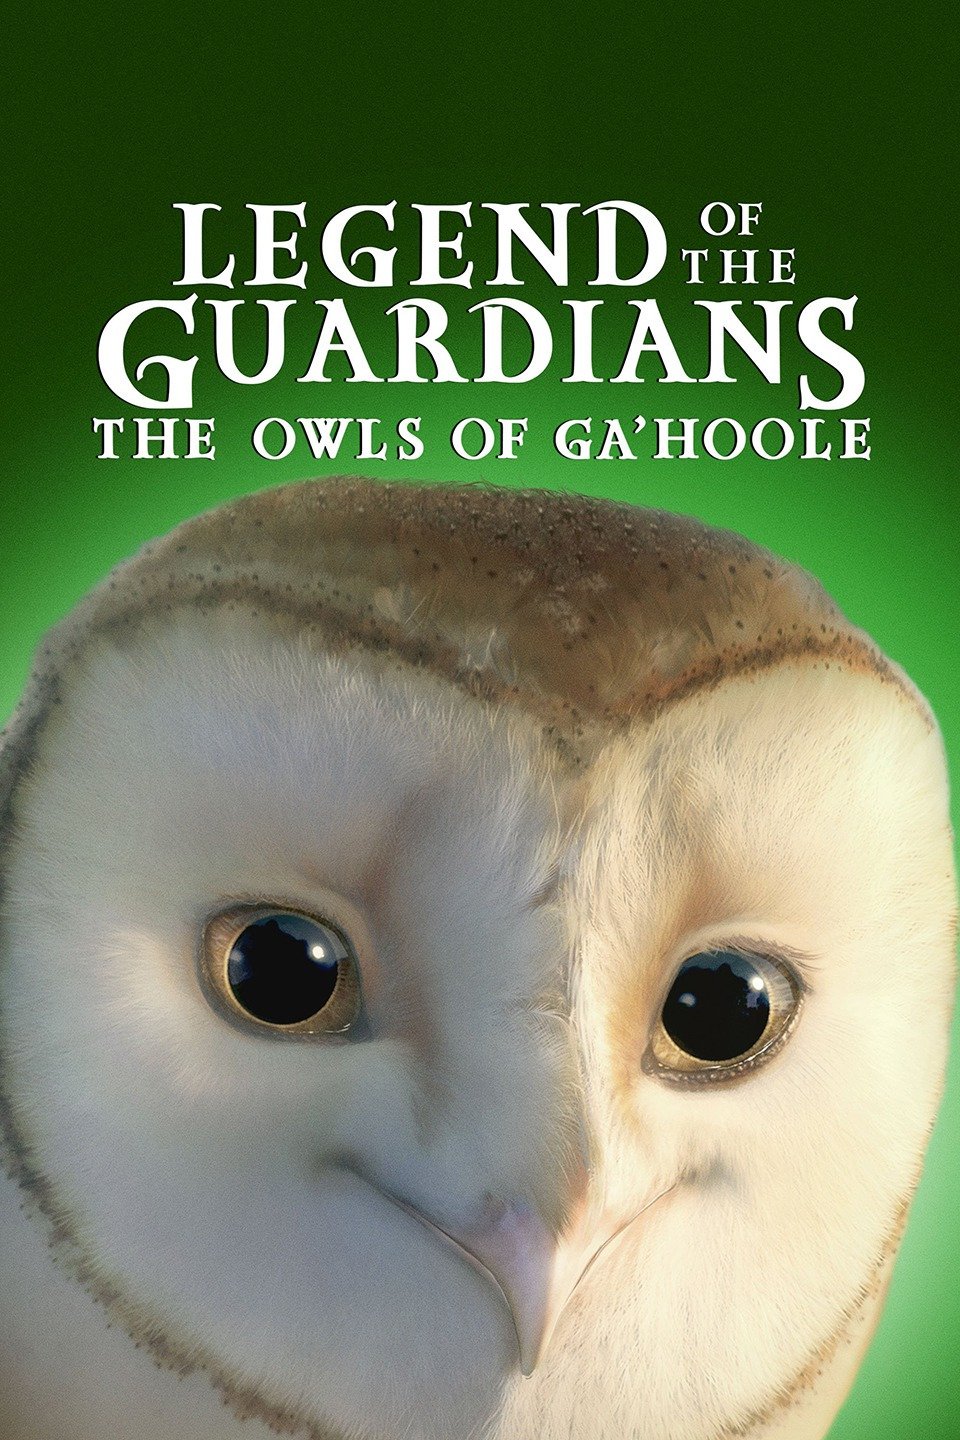 Legend of the Guardians: The Owls of Ga'Hoole - Rotten Tomatoes